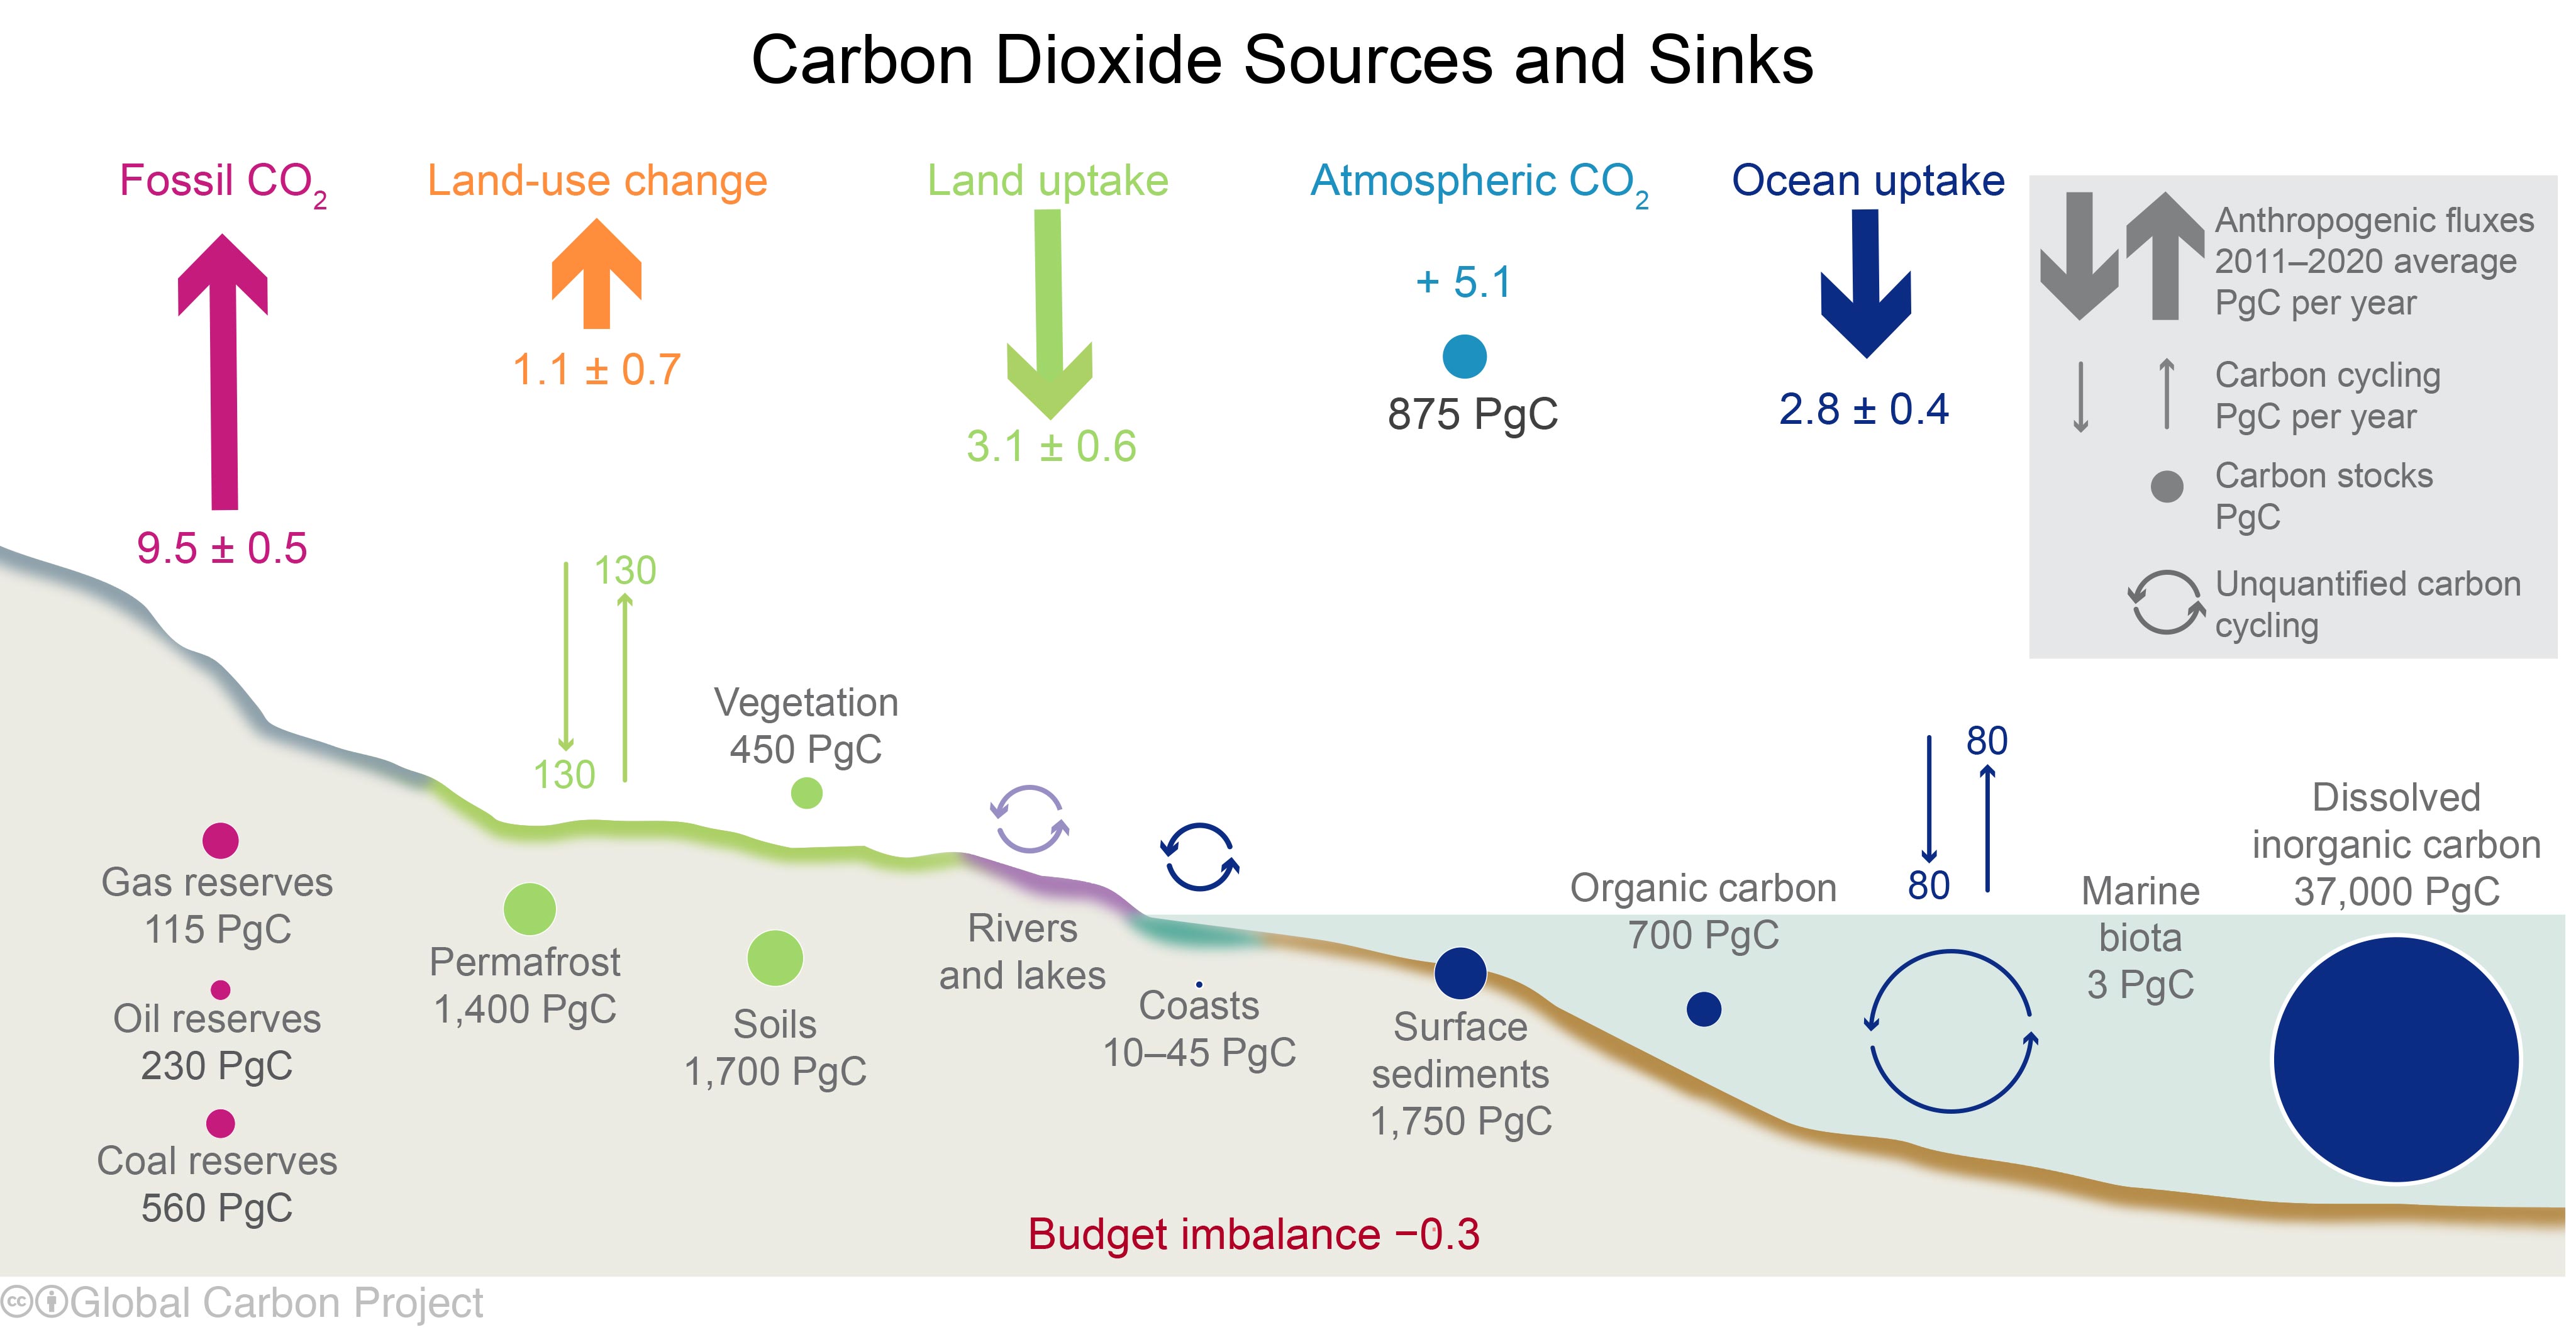 Carbon Dioxide Sources and Sinks